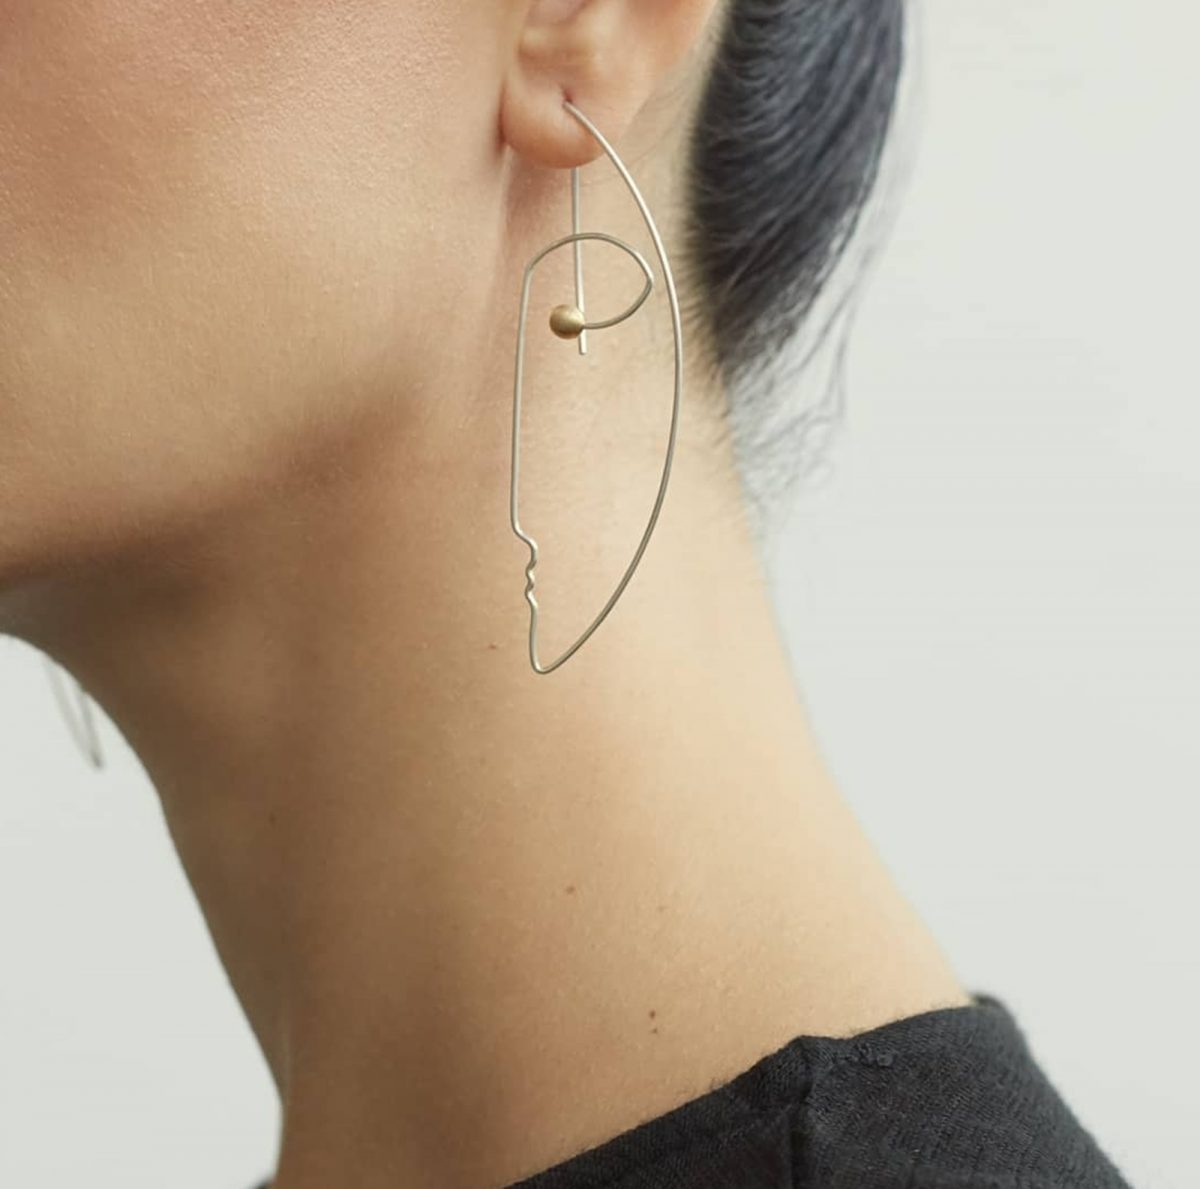 Silver Wire Face Silhouette Earrings with Pearls, Minimalist Jewelry